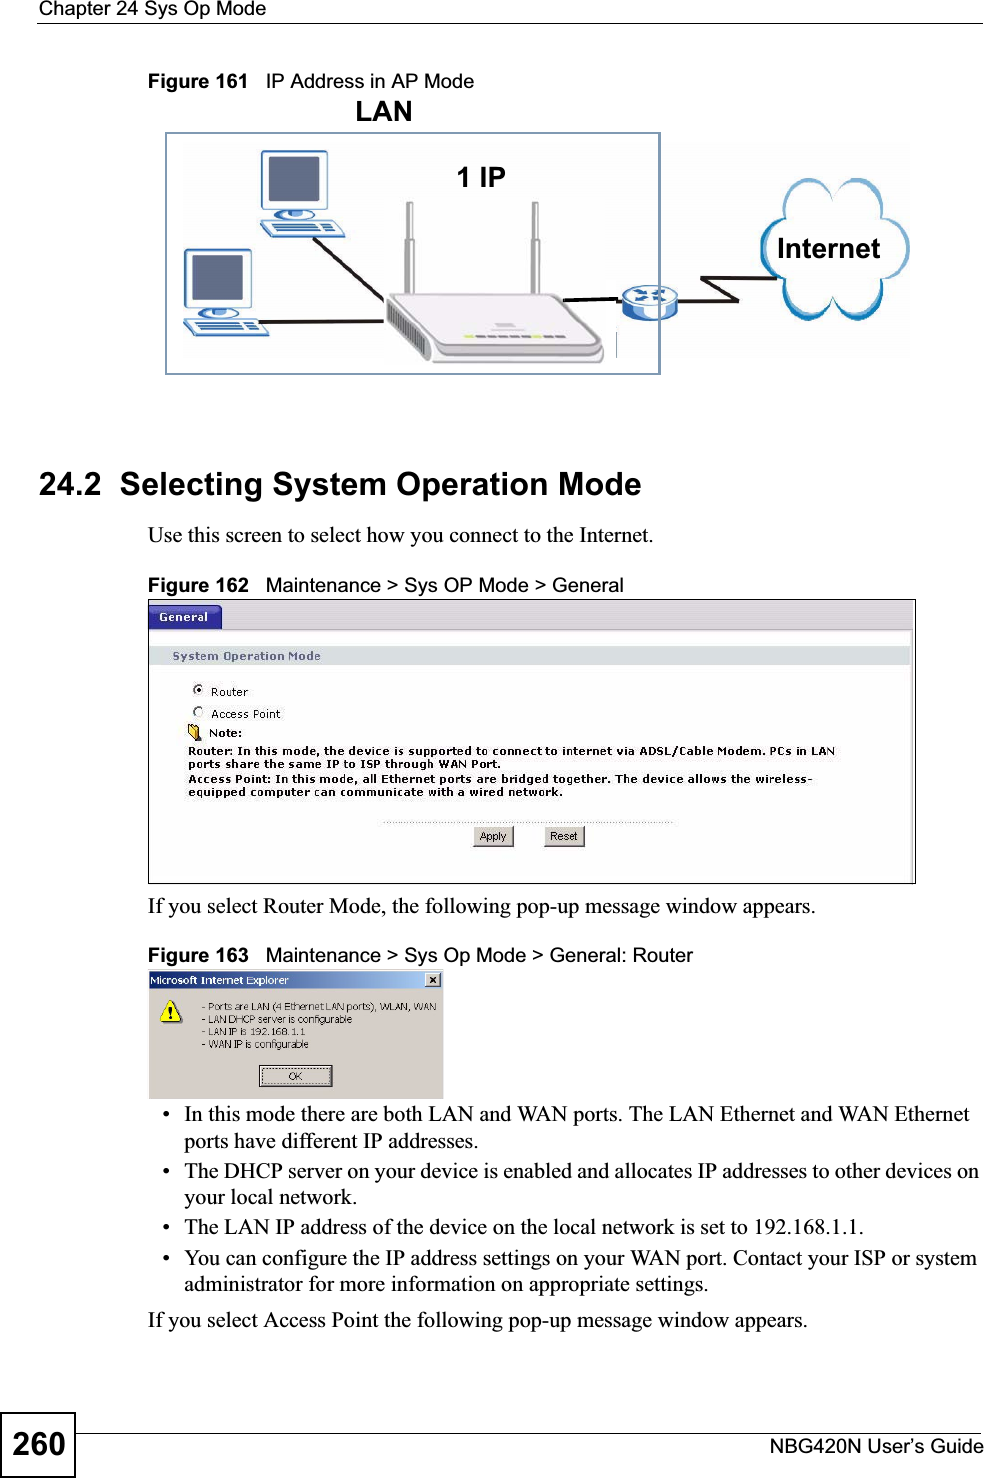 Chapter 24 Sys Op ModeNBG420N User’s Guide260Figure 161   IP Address in AP Mode24.2  Selecting System Operation ModeUse this screen to select how you connect to the Internet. Figure 162   Maintenance &gt; Sys OP Mode &gt; General If you select Router Mode, the following pop-up message window appears.Figure 163   Maintenance &gt; Sys Op Mode &gt; General: Router • In this mode there are both LAN and WAN ports. The LAN Ethernet and WAN Ethernet ports have different IP addresses. • The DHCP server on your device is enabled and allocates IP addresses to other devices on your local network. • The LAN IP address of the device on the local network is set to 192.168.1.1.• You can configure the IP address settings on your WAN port. Contact your ISP or system administrator for more information on appropriate settings.If you select Access Point the following pop-up message window appears.1 IPLANInternet